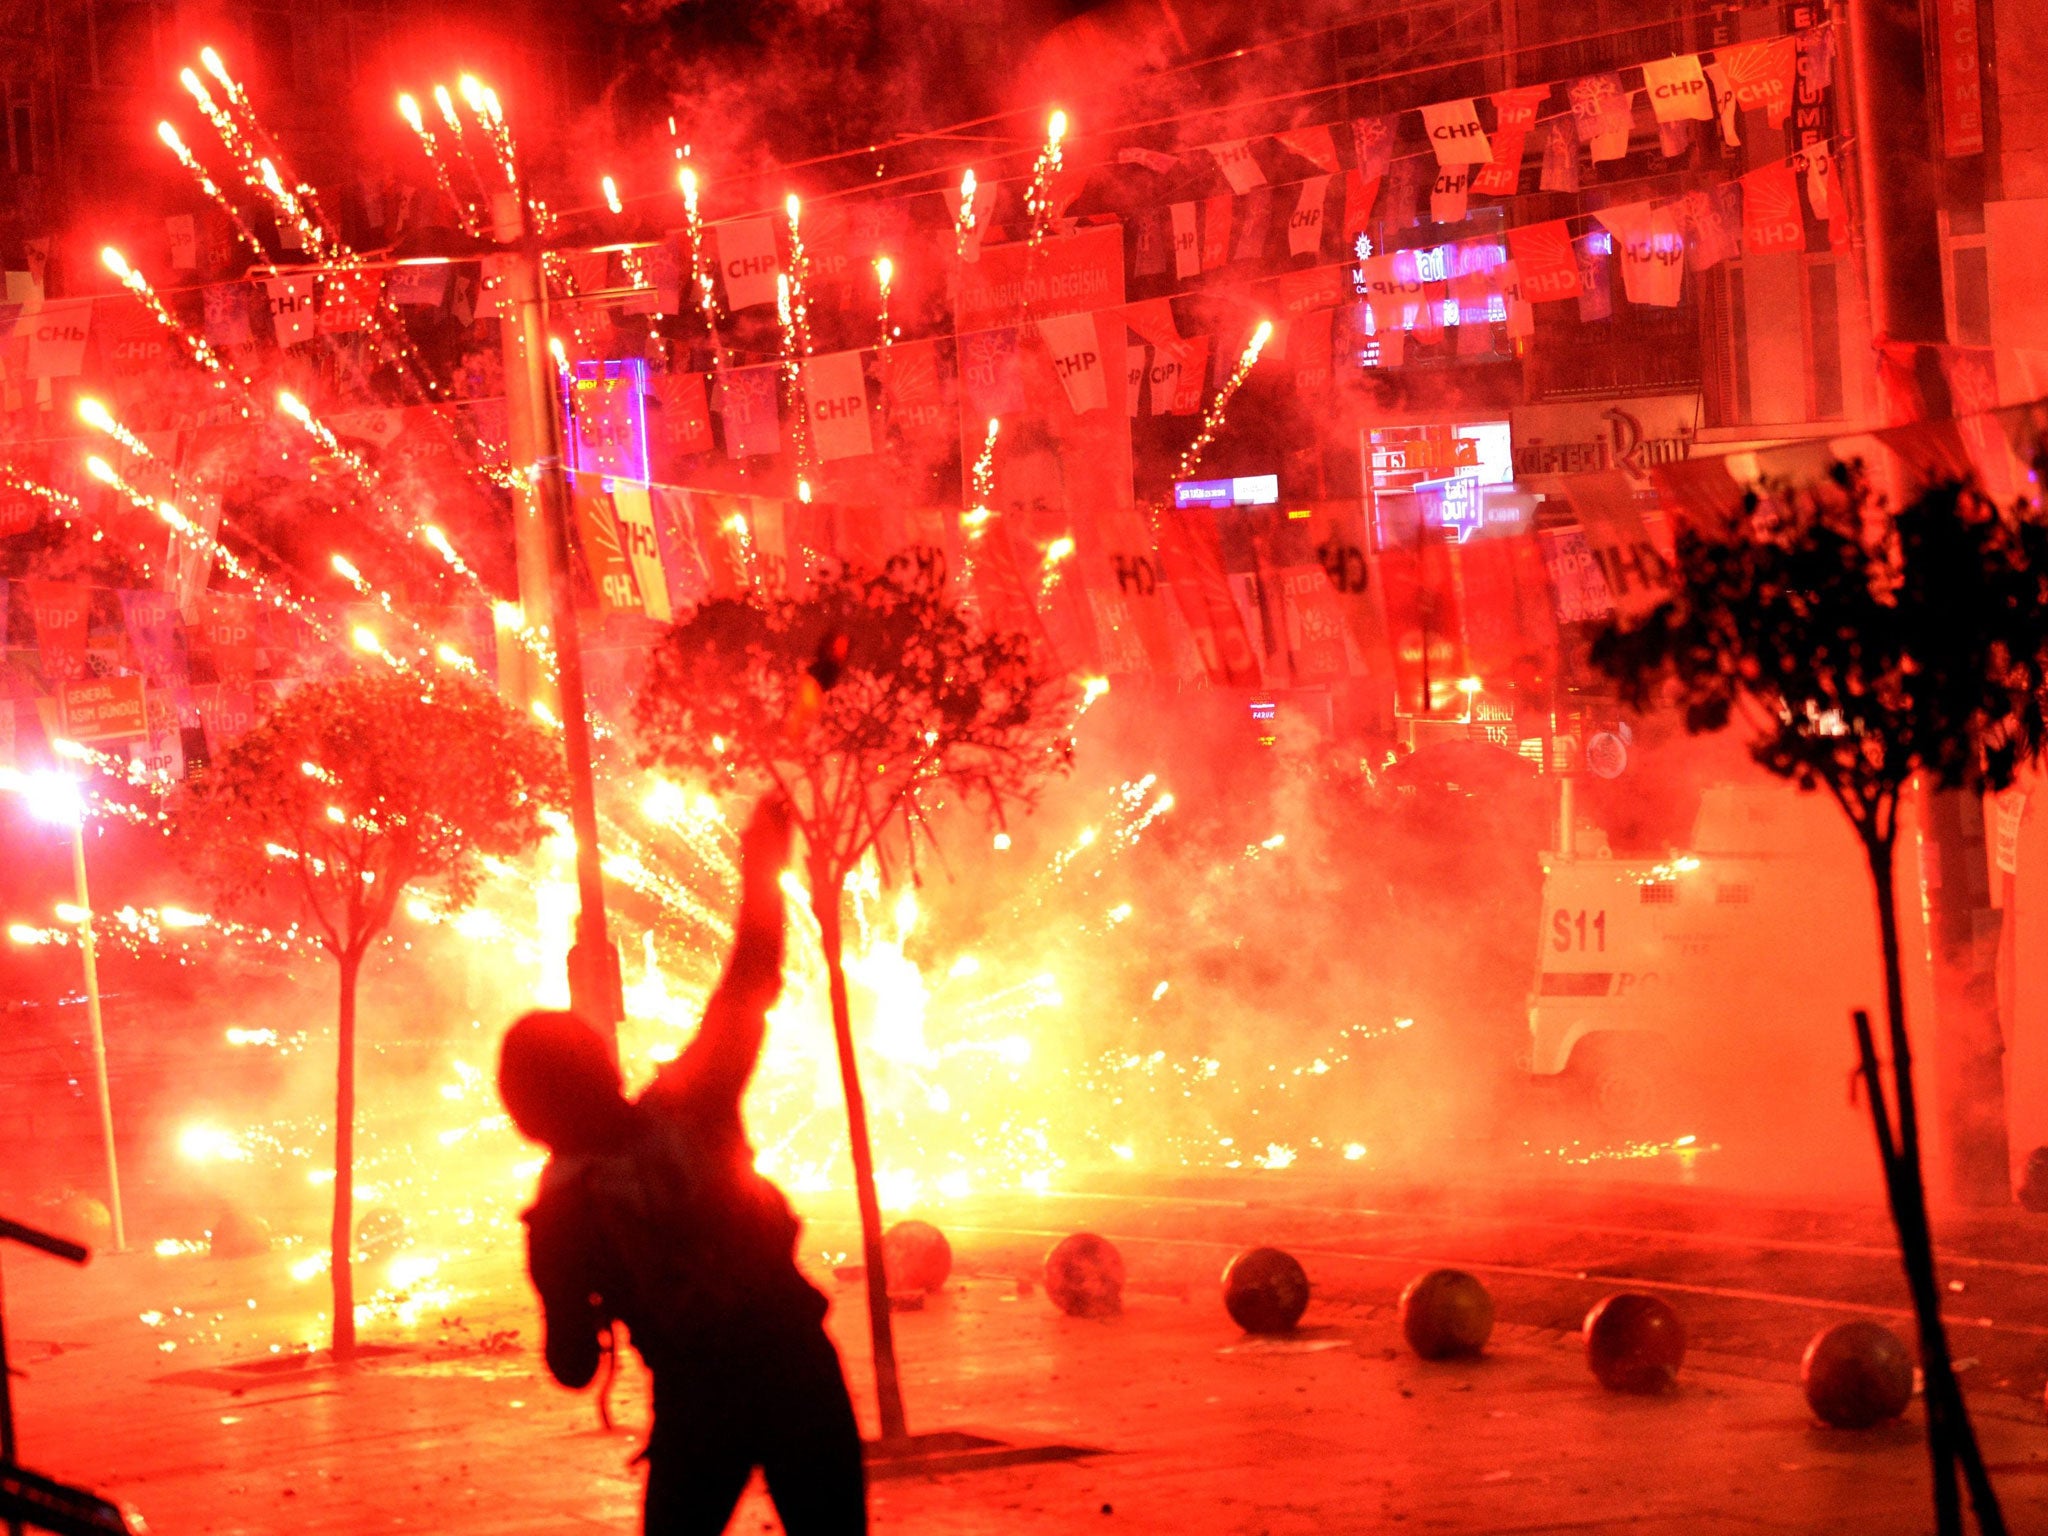 Fireworks thrown by protesters against Turkish riot police explodes and illuminates the scene during a demonstration in Istanbul